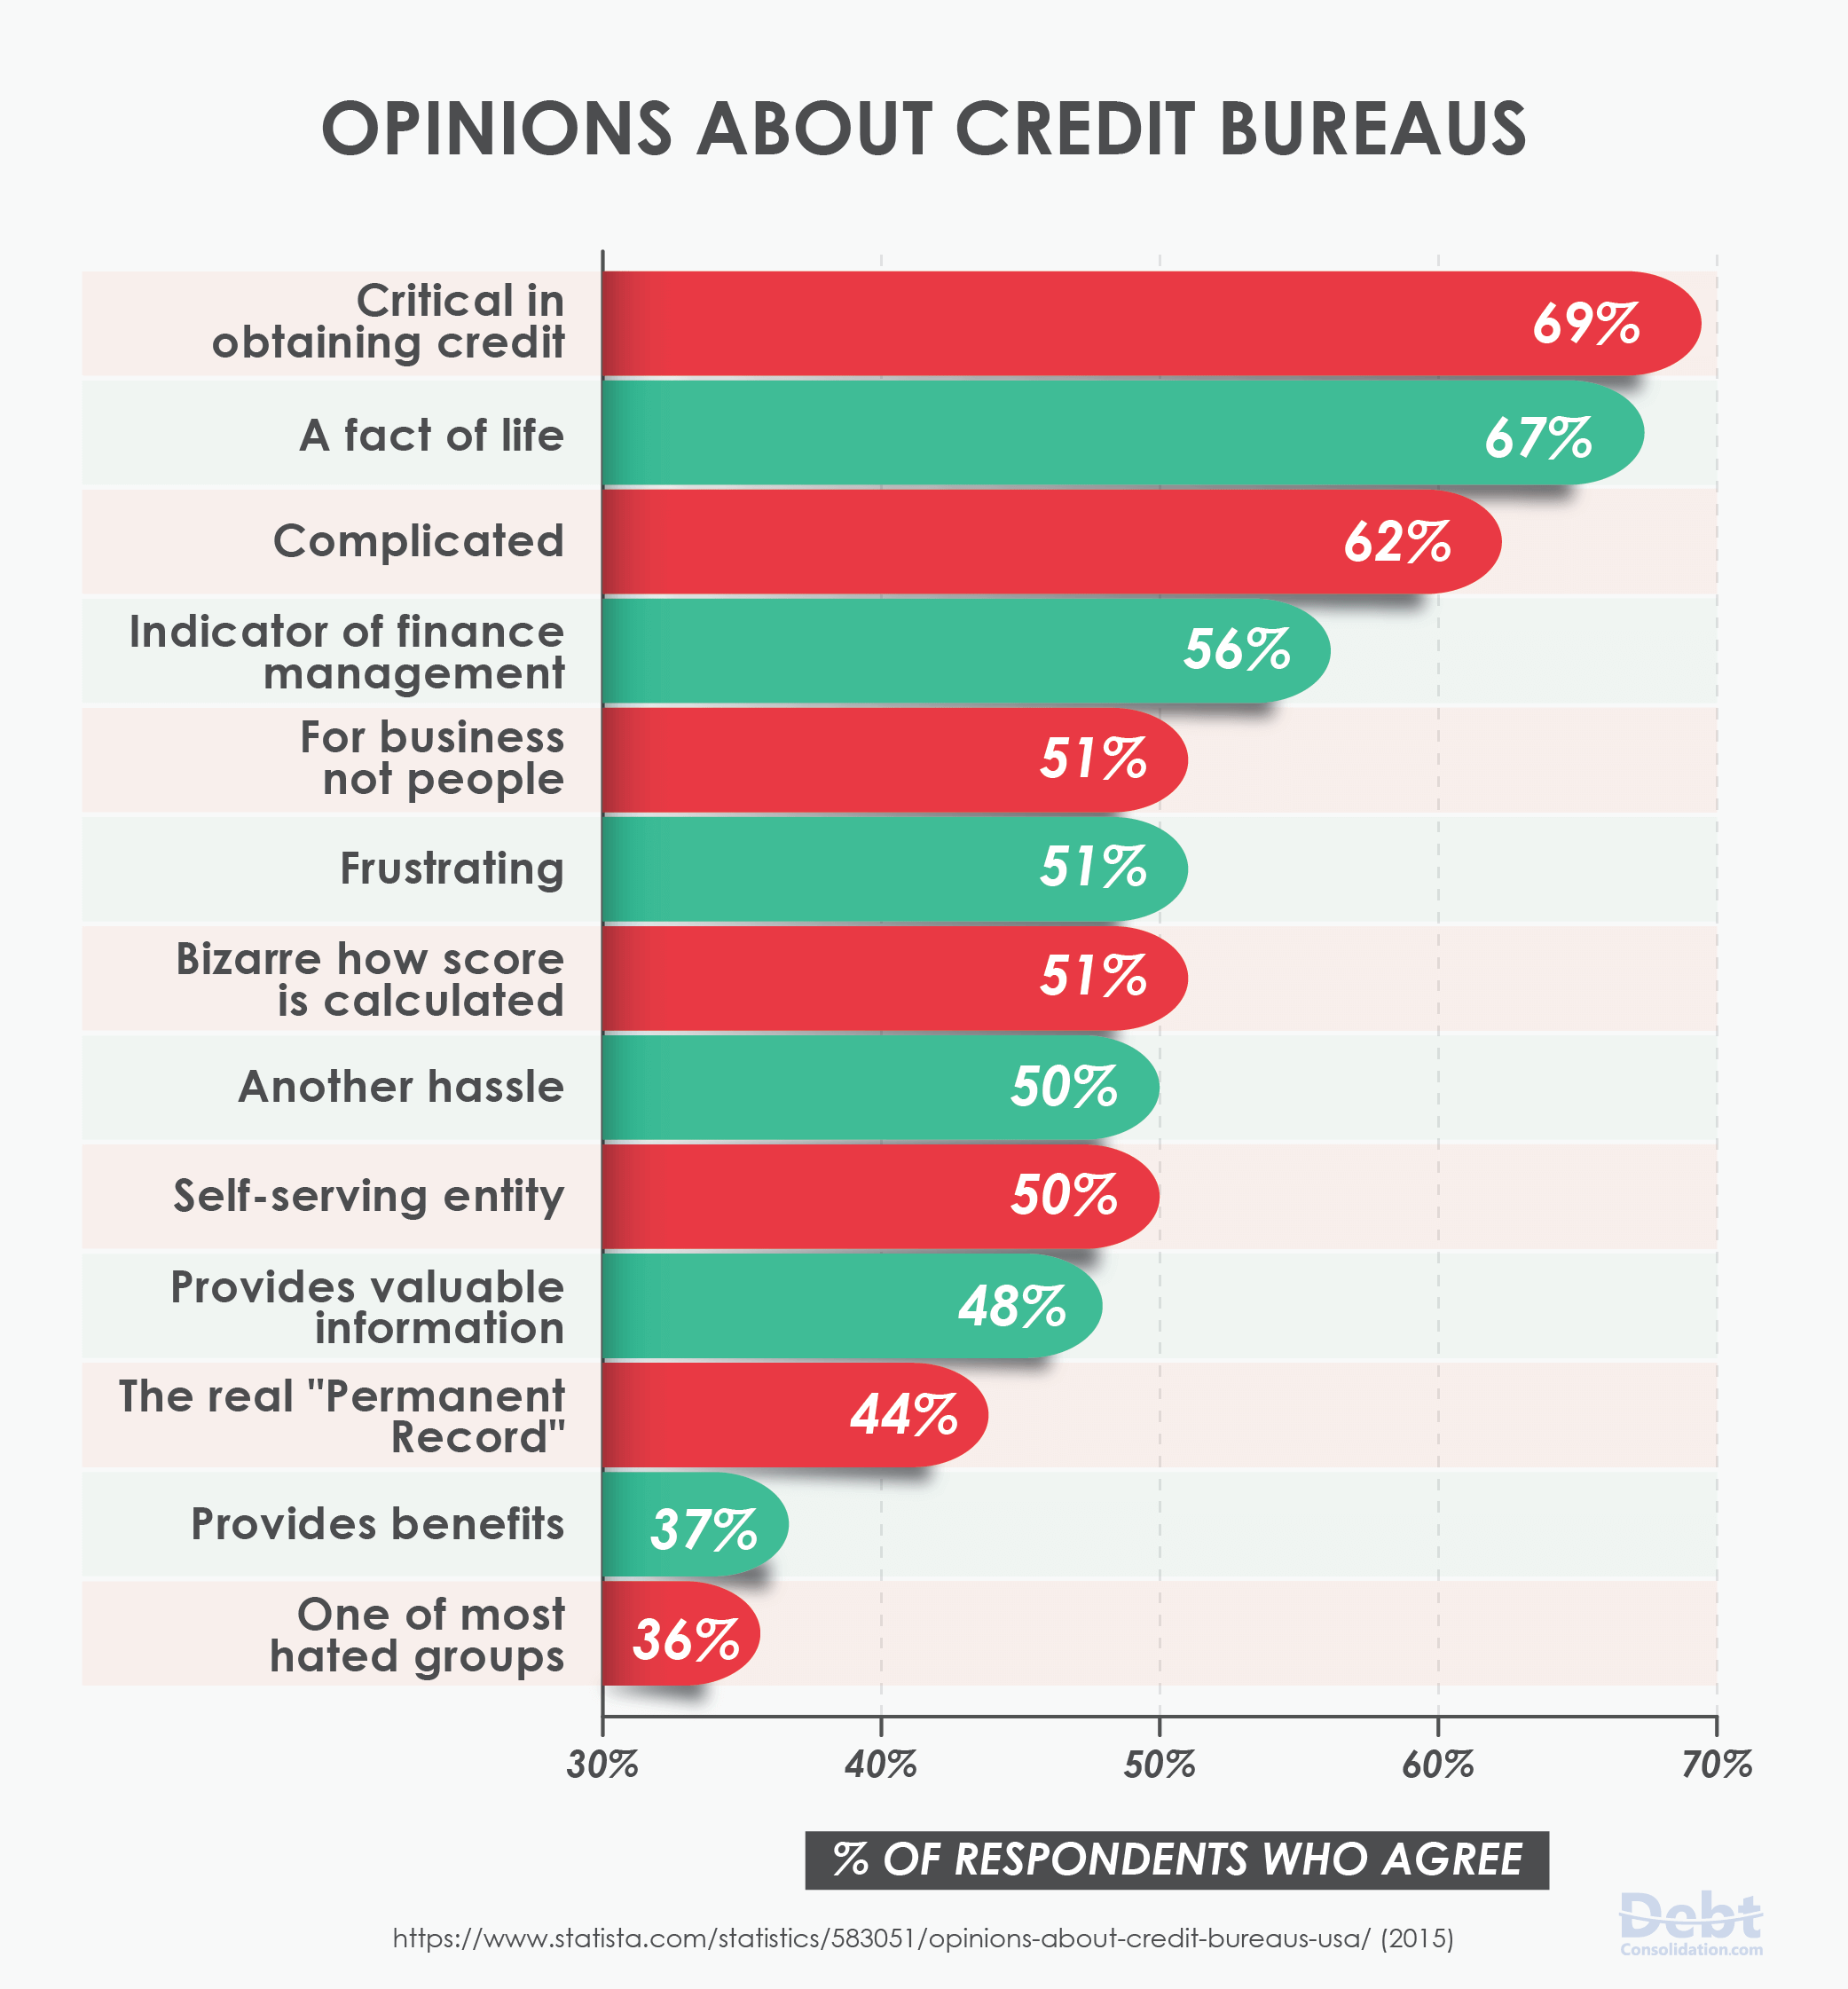 Americans' Opinions About Credit Bureaus